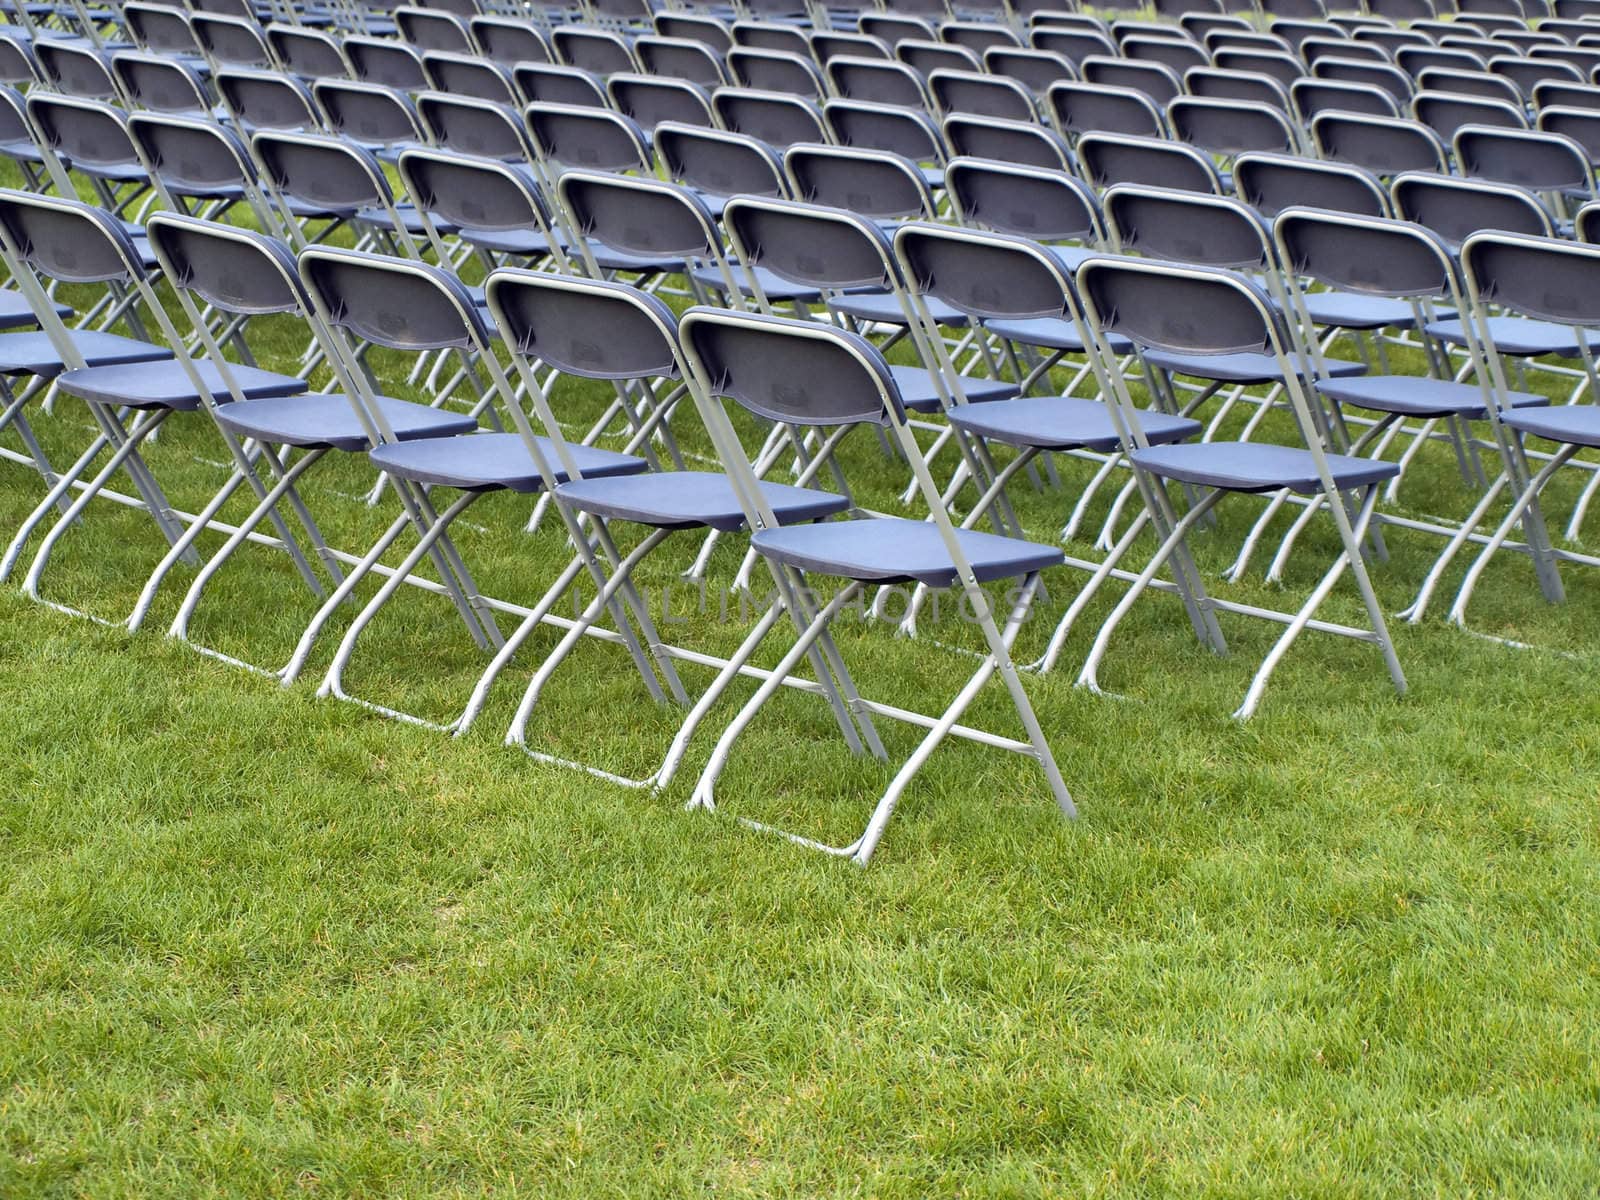 Chairs on Green Grass by watamyr